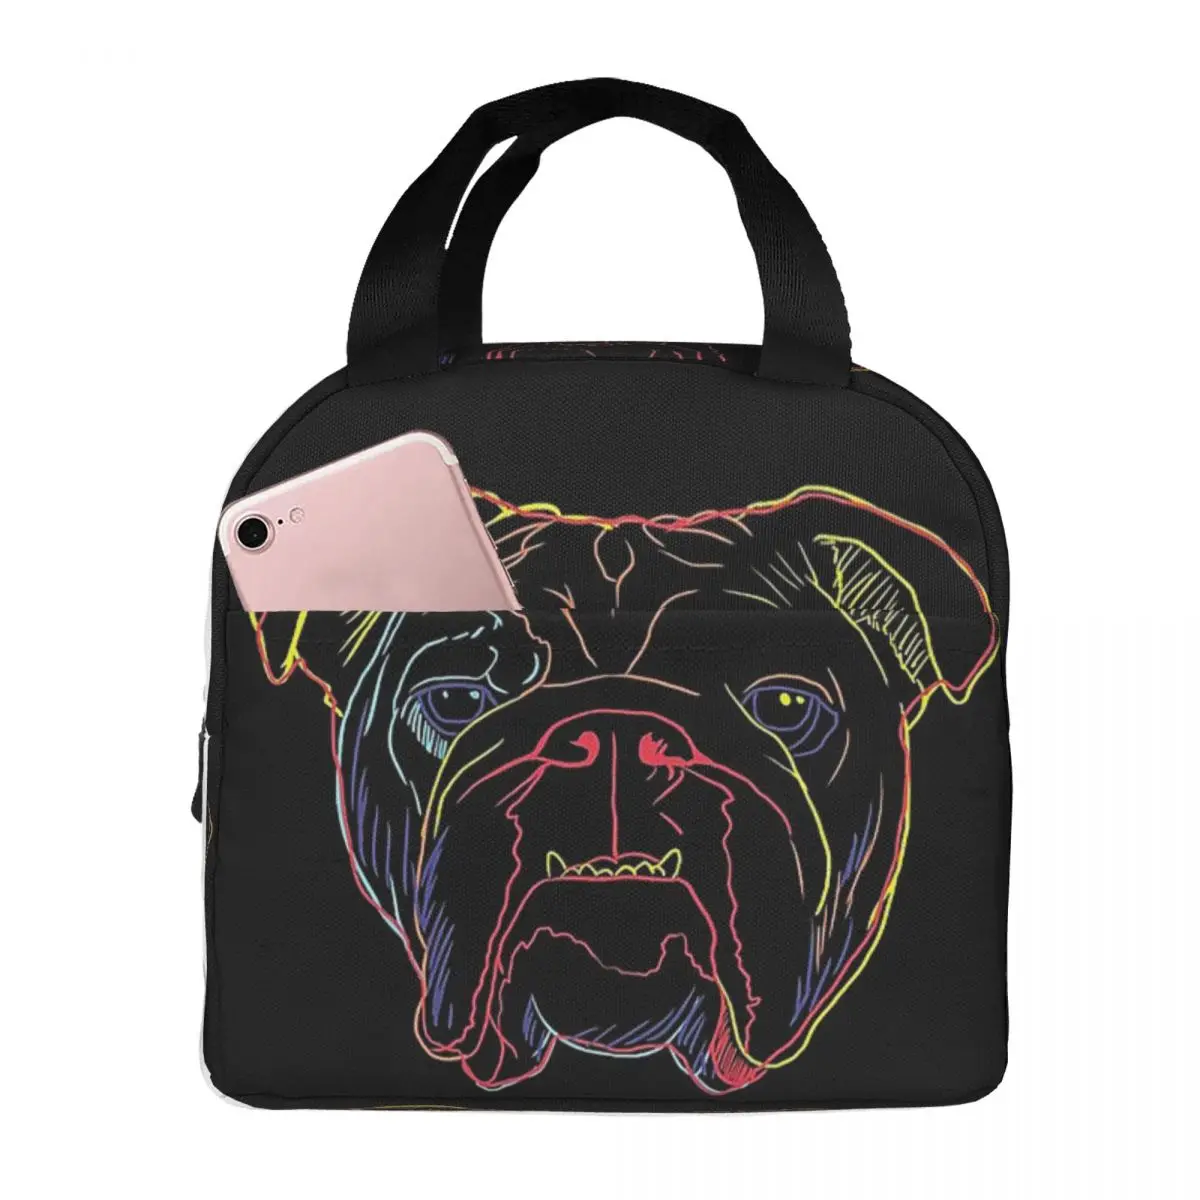 Dog English Bulldog Puppy Lunch Bag Portable Insulated Oxford Cooler Bags Art Thermal Cold Food Picnic Lunch Box for Women Kids